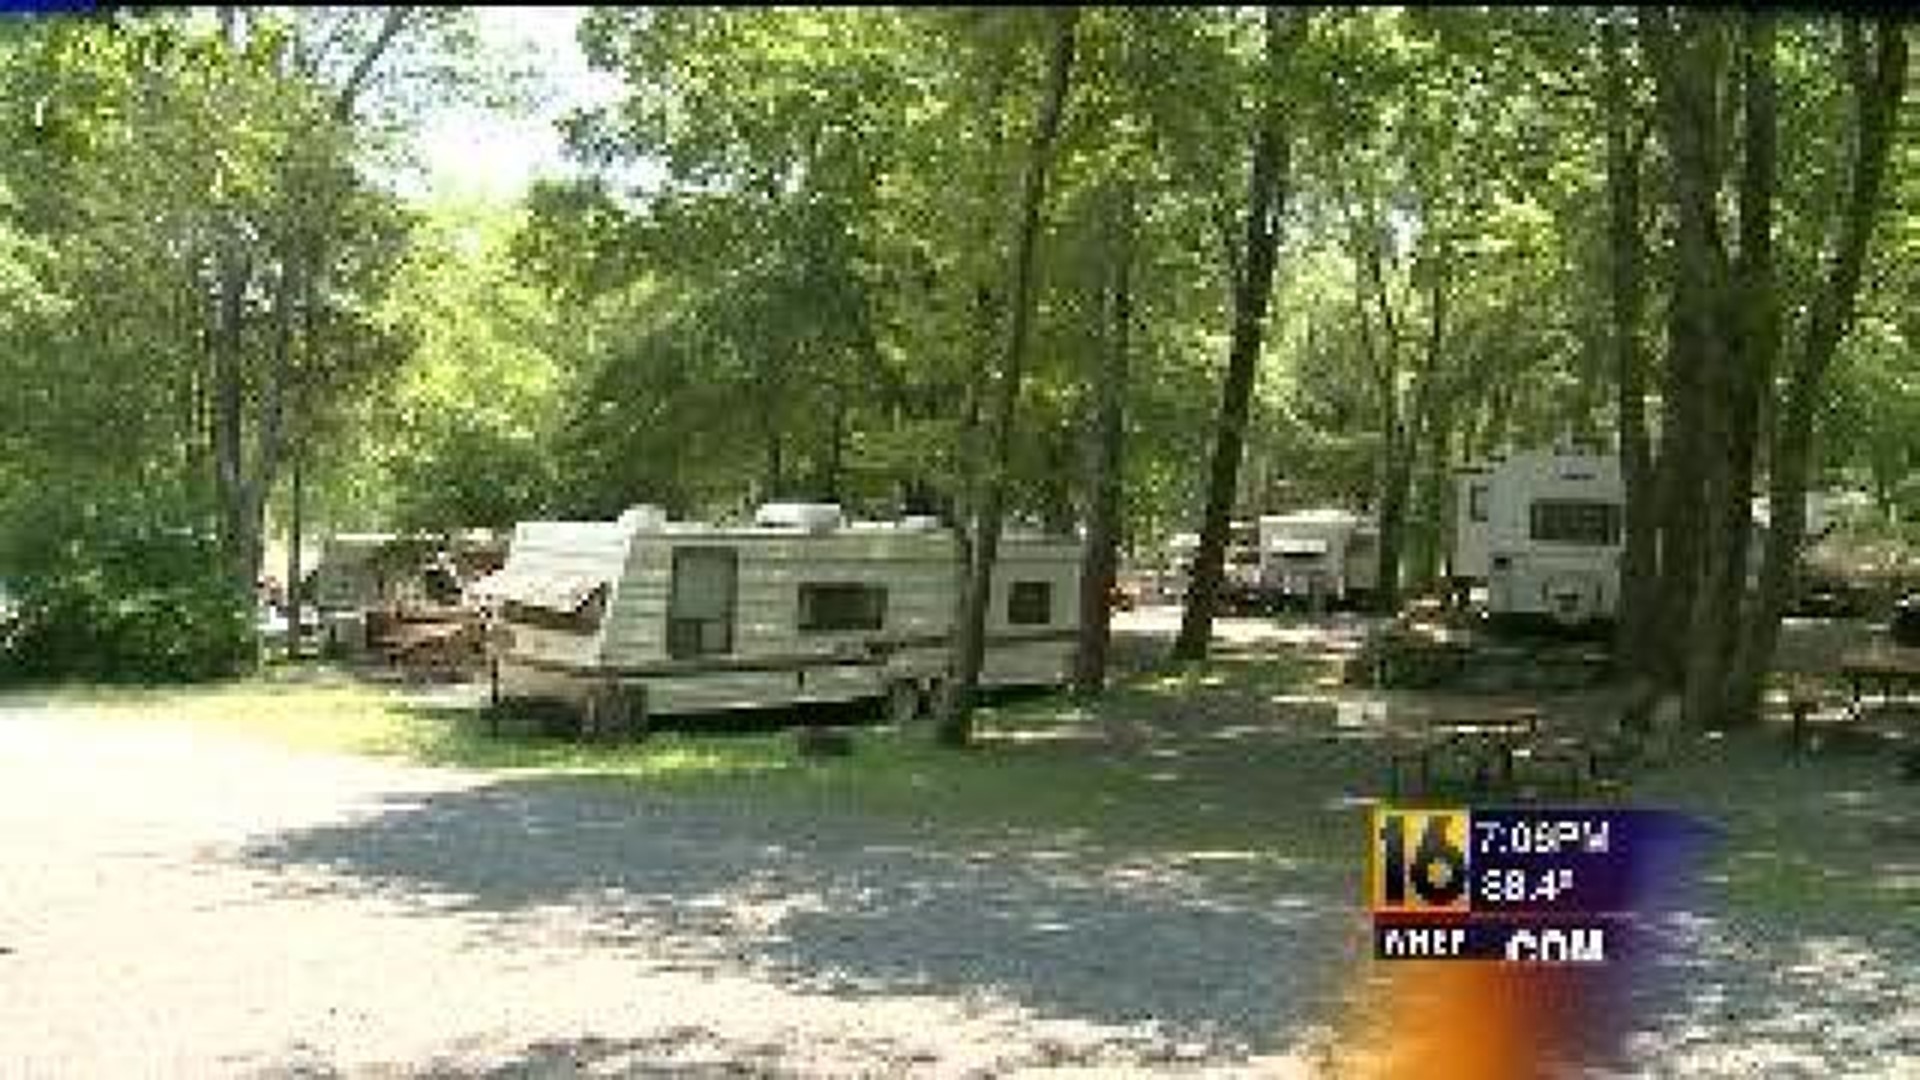 Heat Draws People to Campground